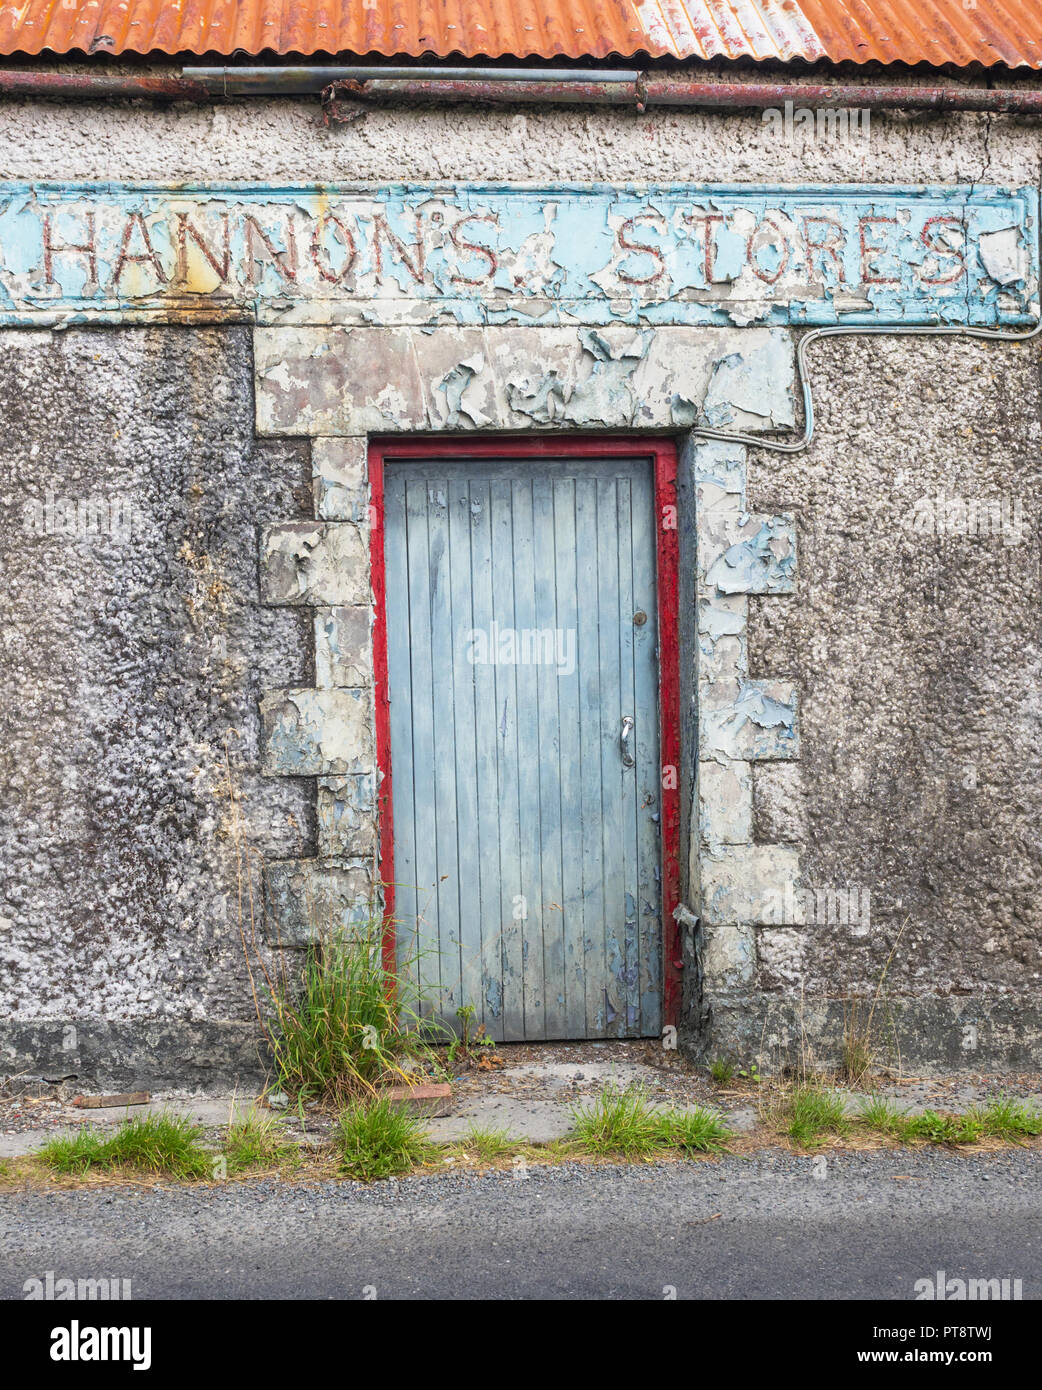 HEADFORD, IRELAND - AUGUST 8, 2018: The abandoned Hannon's Stores building next to a country road near Headford, in County Galway, Ireland. Stock Photo